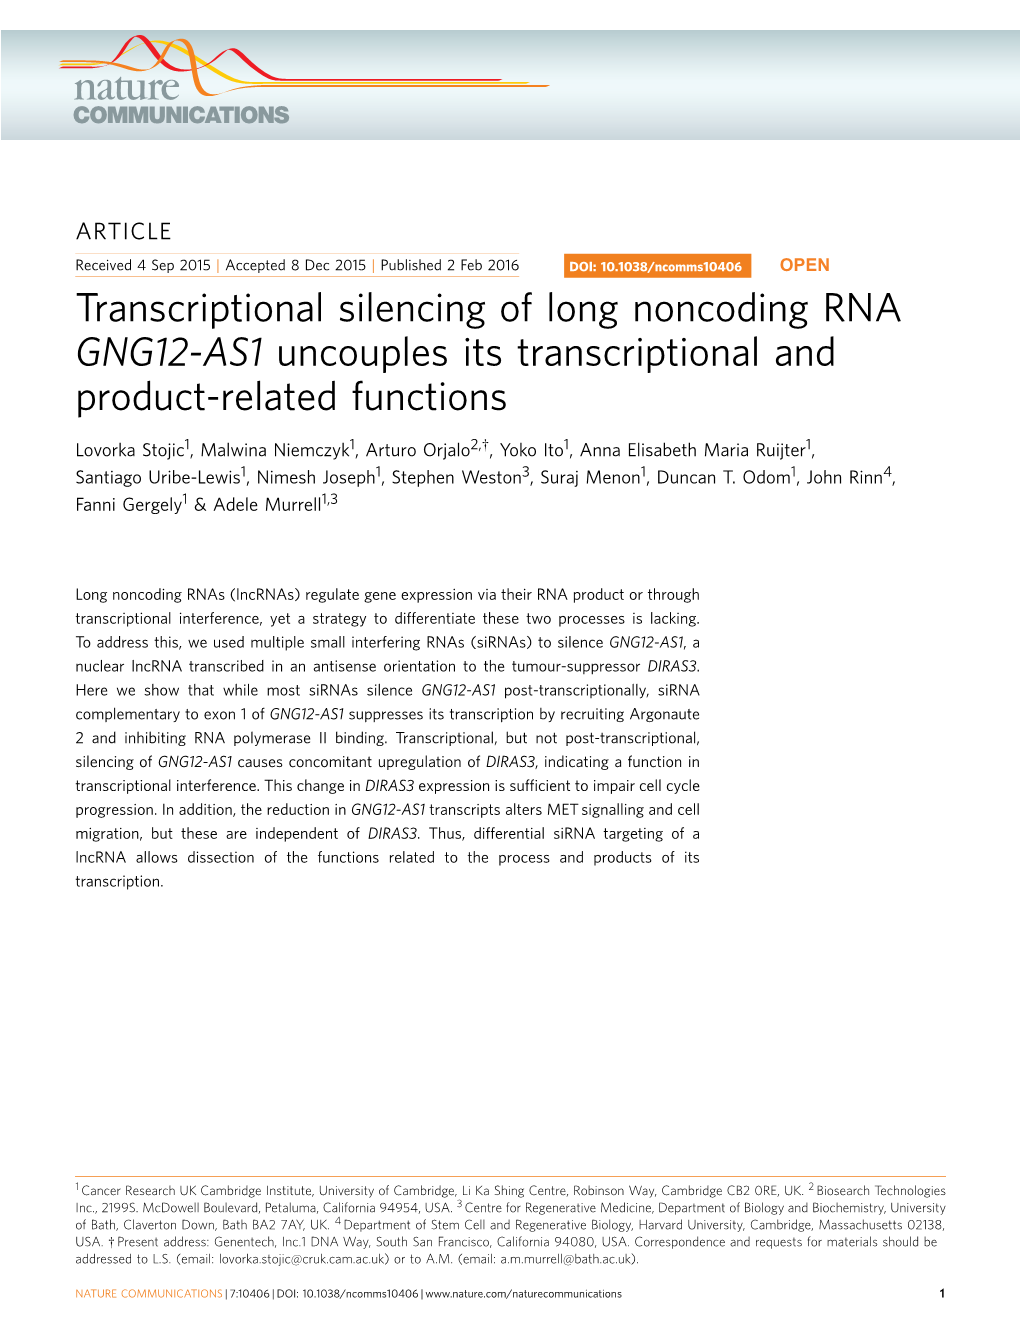 GNG12-AS1 Uncouples Its Transcriptional and Product-Related Functions